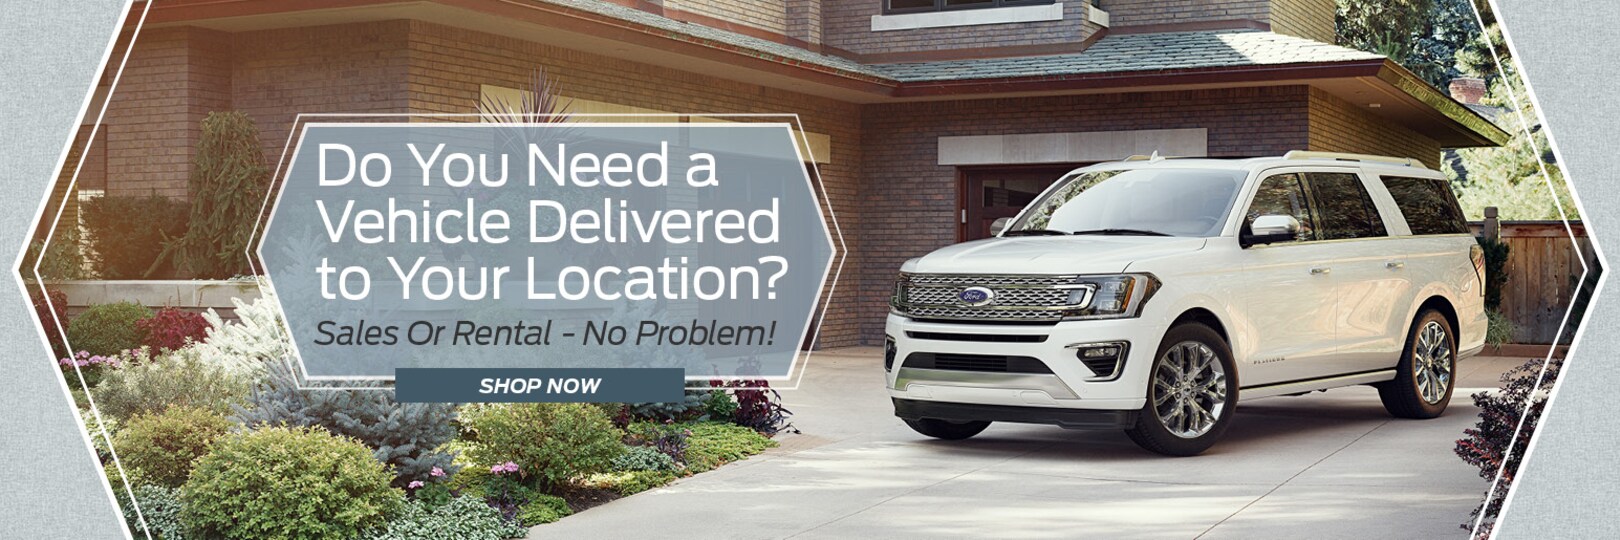 Broadway Ford Truck Sales Inc | Ford Dealership in St Louis MO